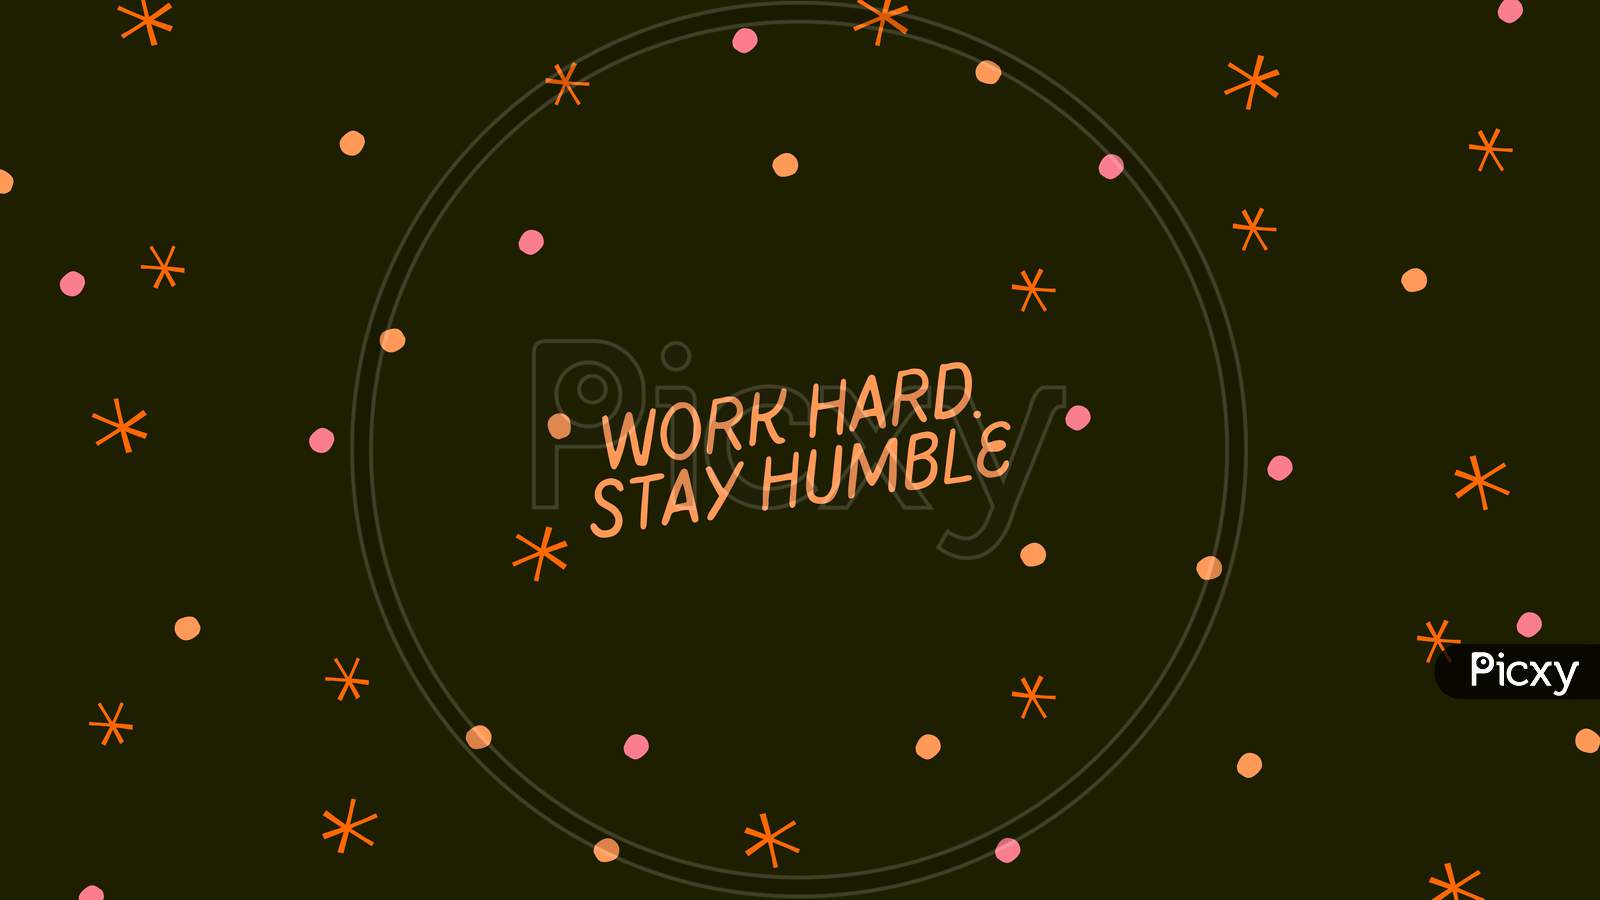 Image Of Colorful Dots Organic Typography Desktop Wallpaper Work Hard. Stay Humble (Motivational Poster) FG974656 Picxy